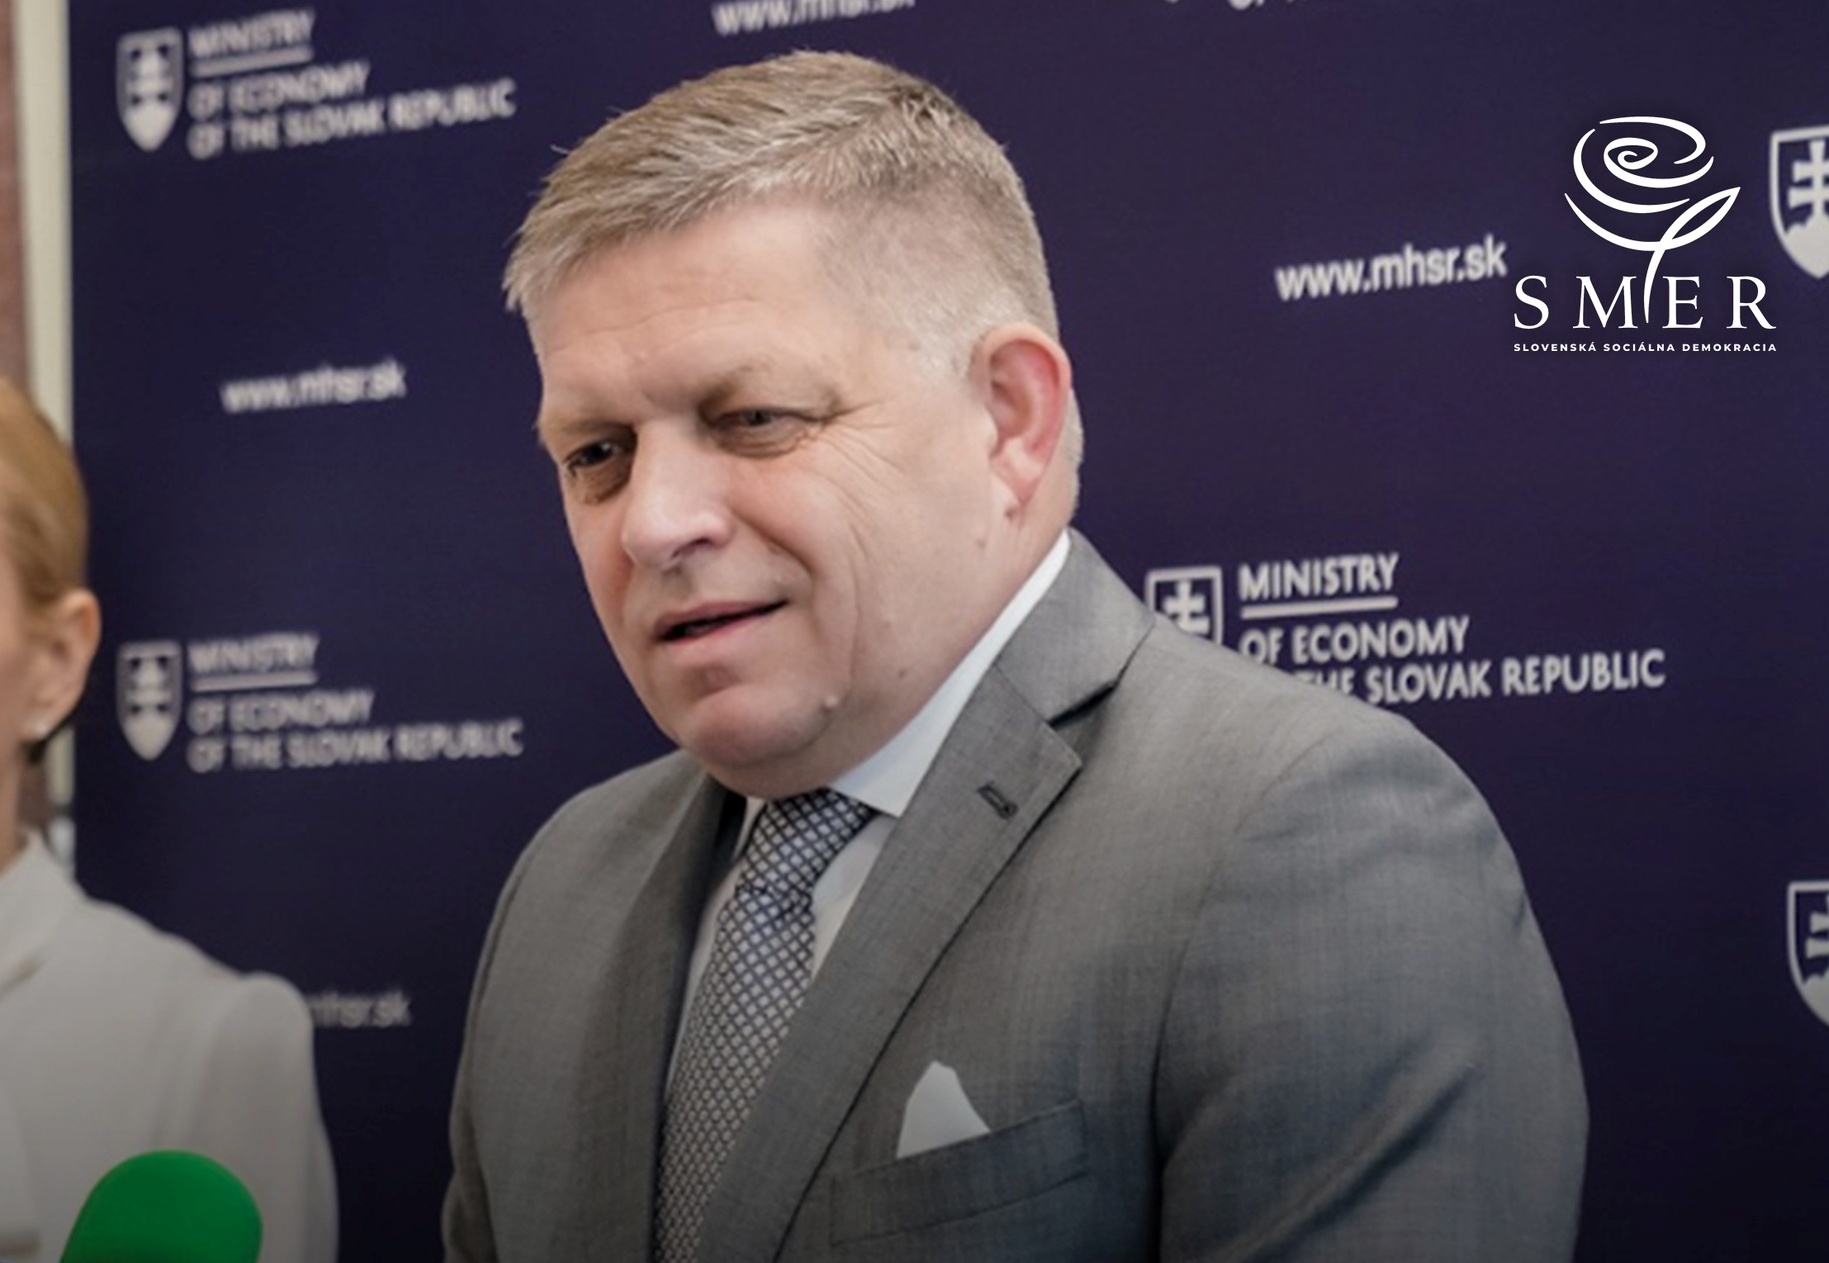 Hungary's Politicians Shocked and Dismayed by Attack on Robert Fico